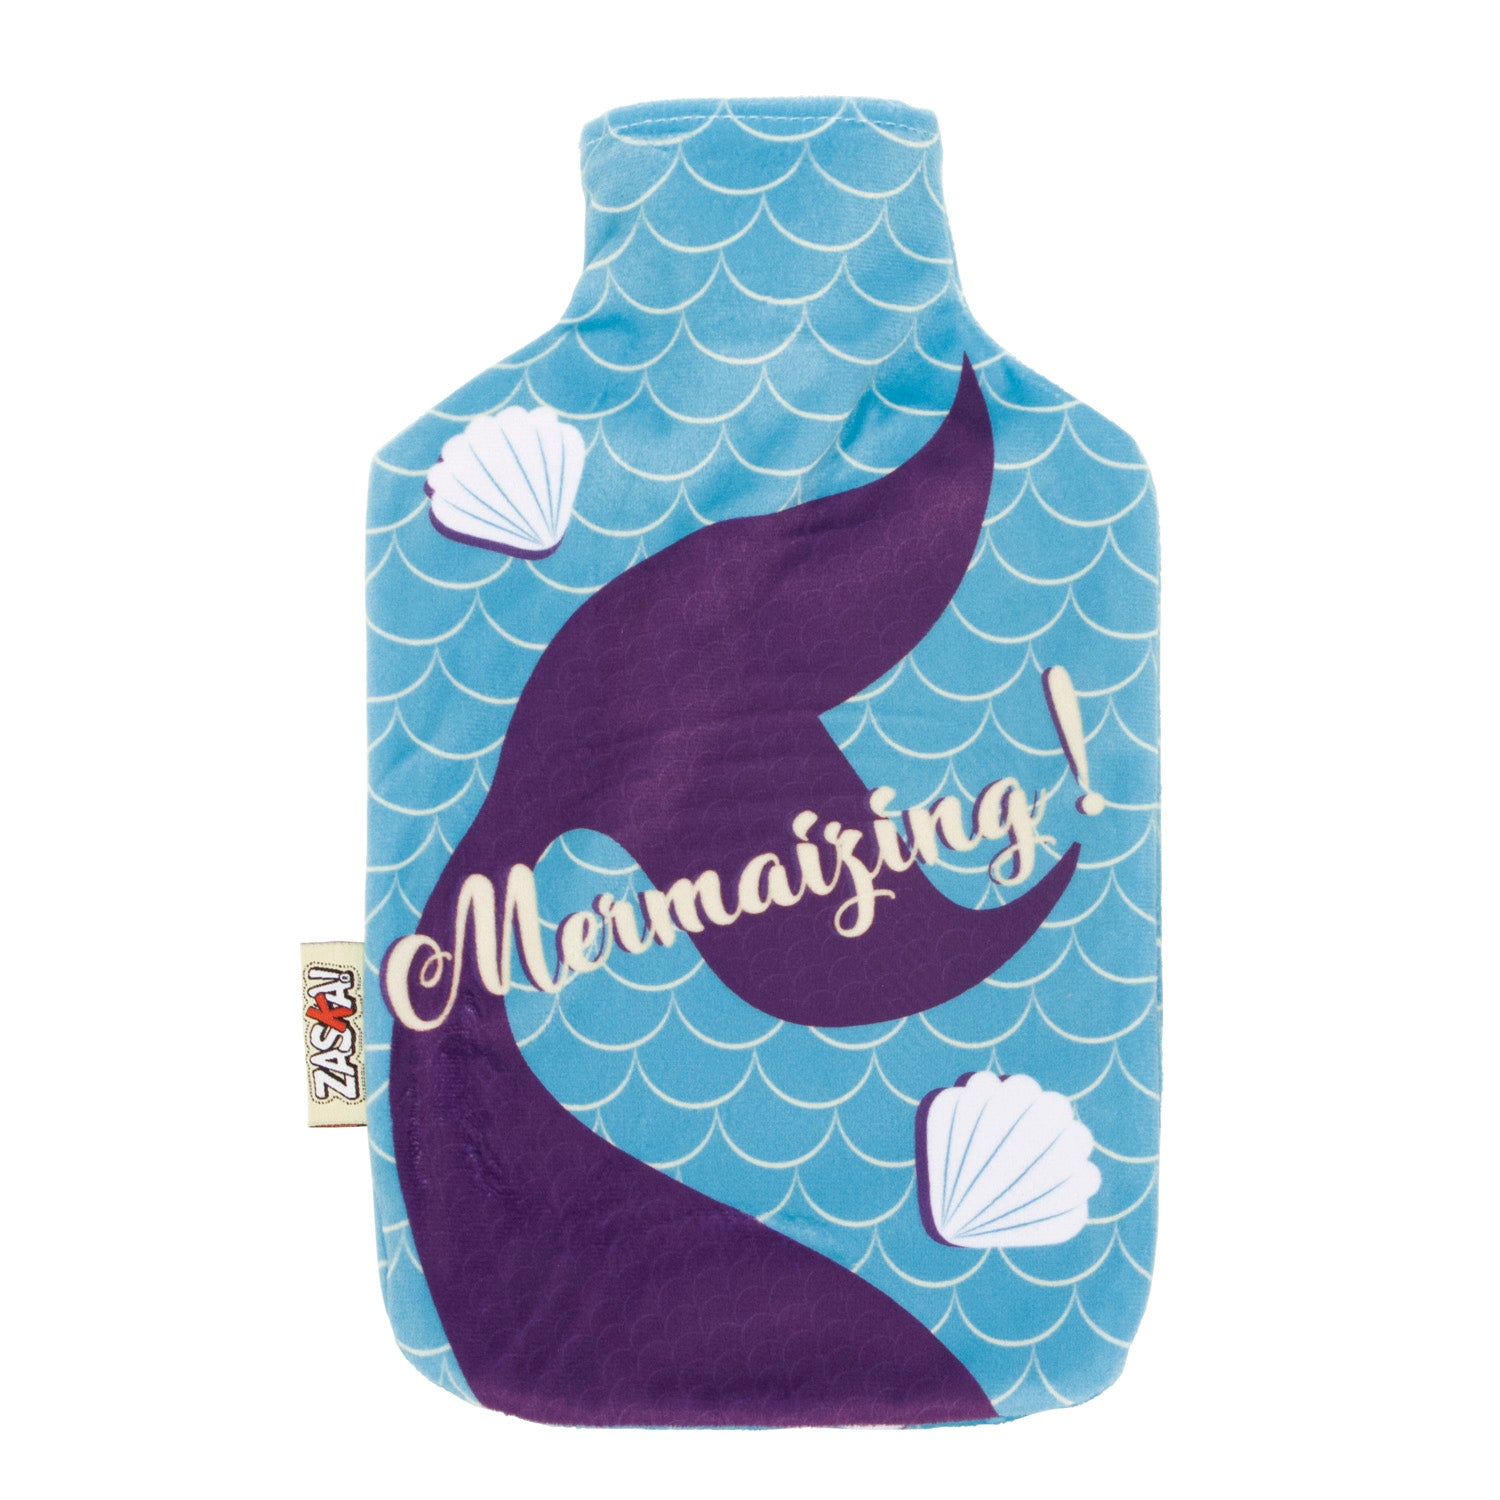 Mermaid Hot Water Bottle With Soft Textile Cover by Zaska